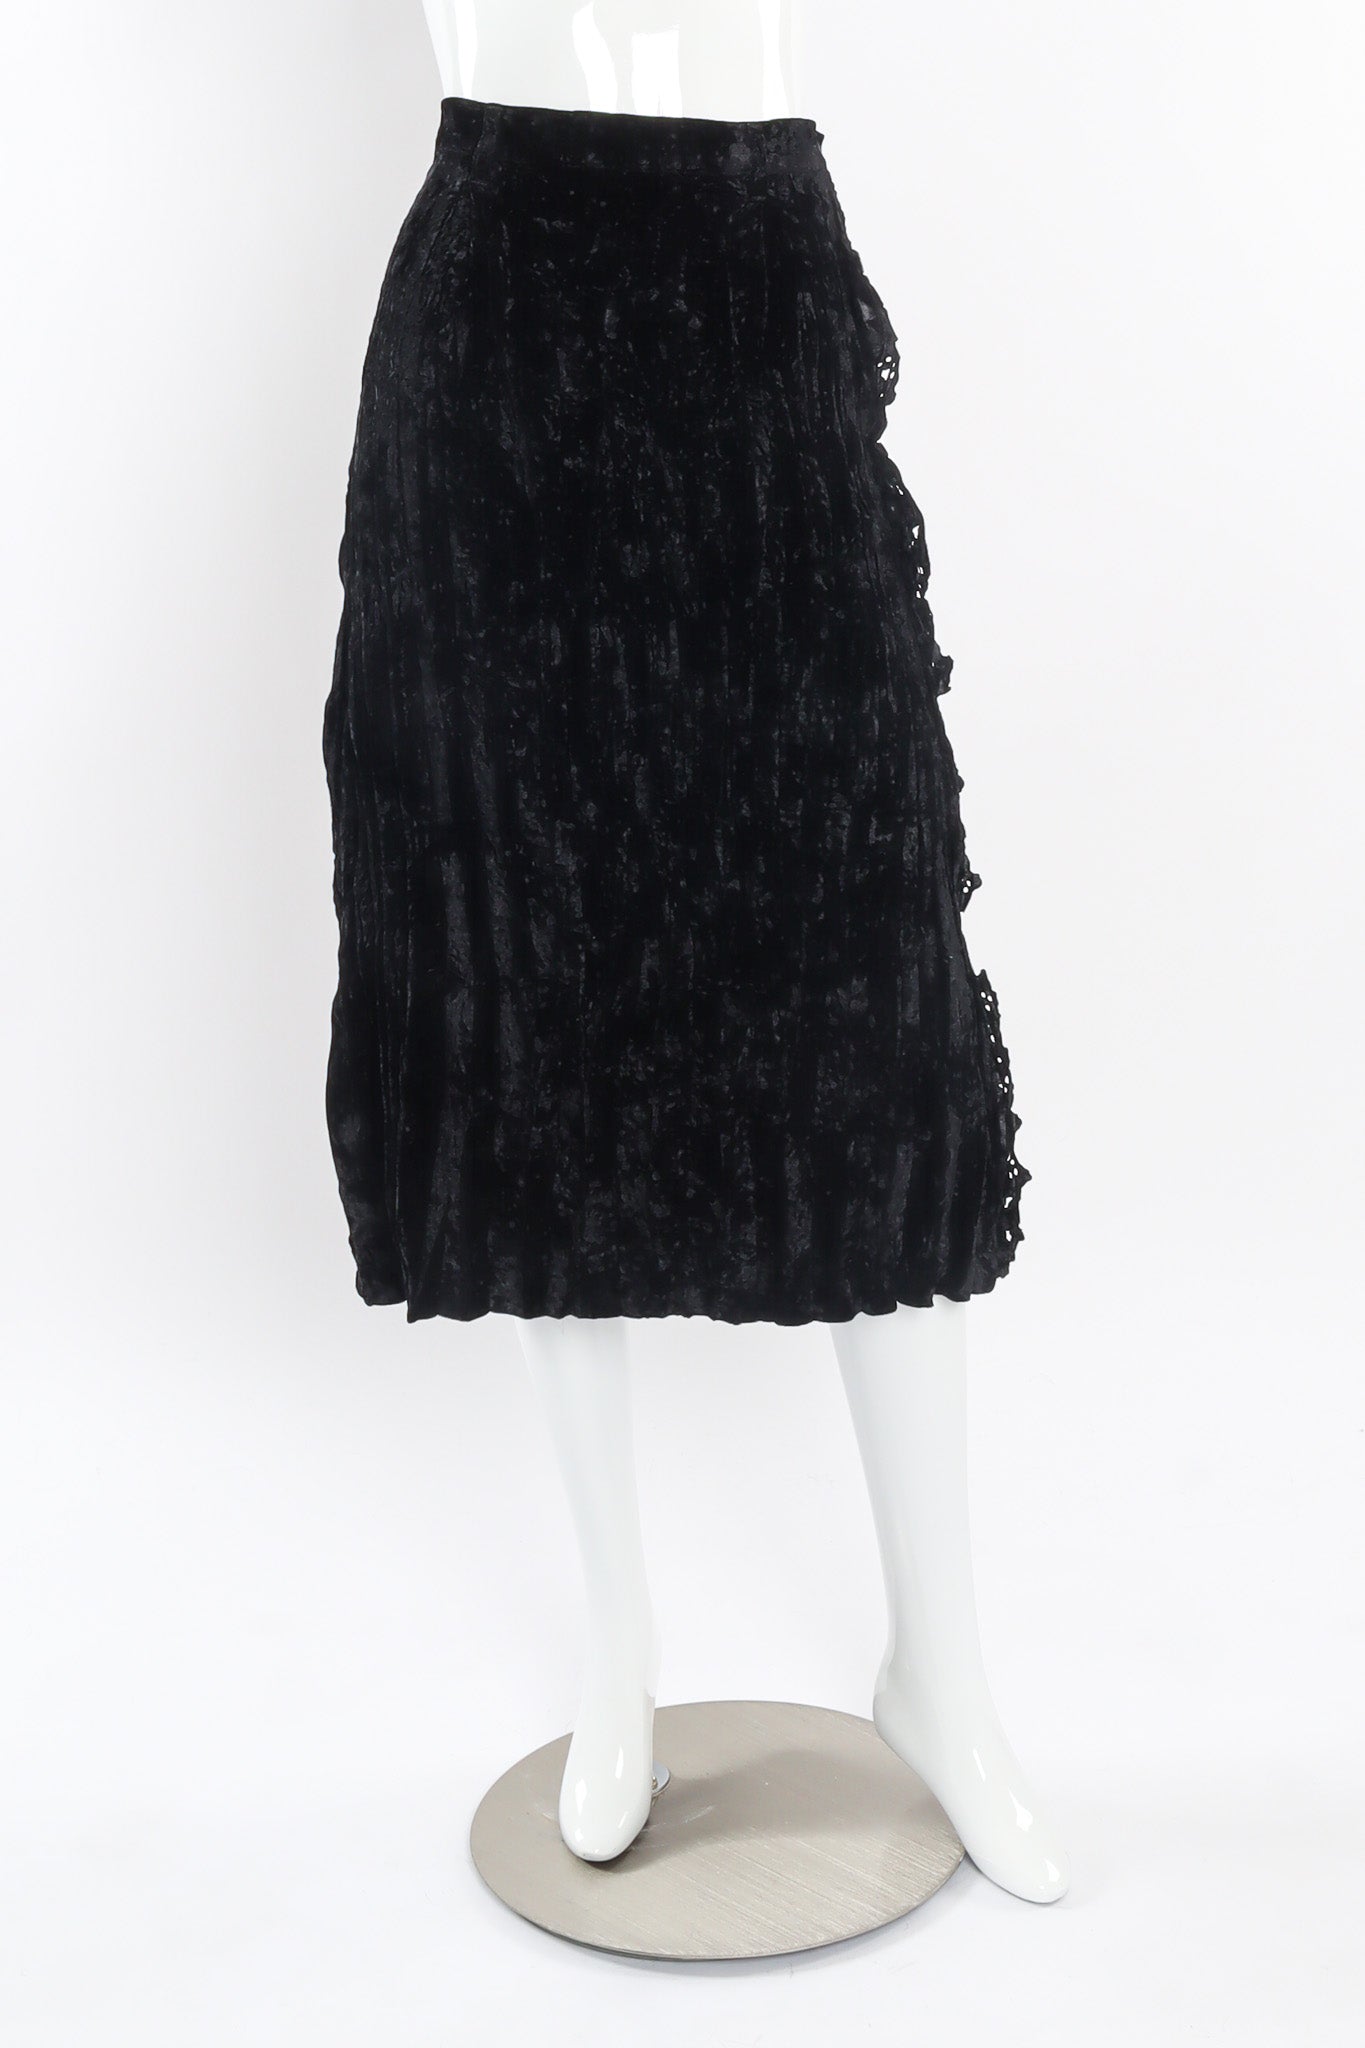 Crushed velvet midi skirt with eyelet lace by Issey Miyake Féte front view photo @recessla